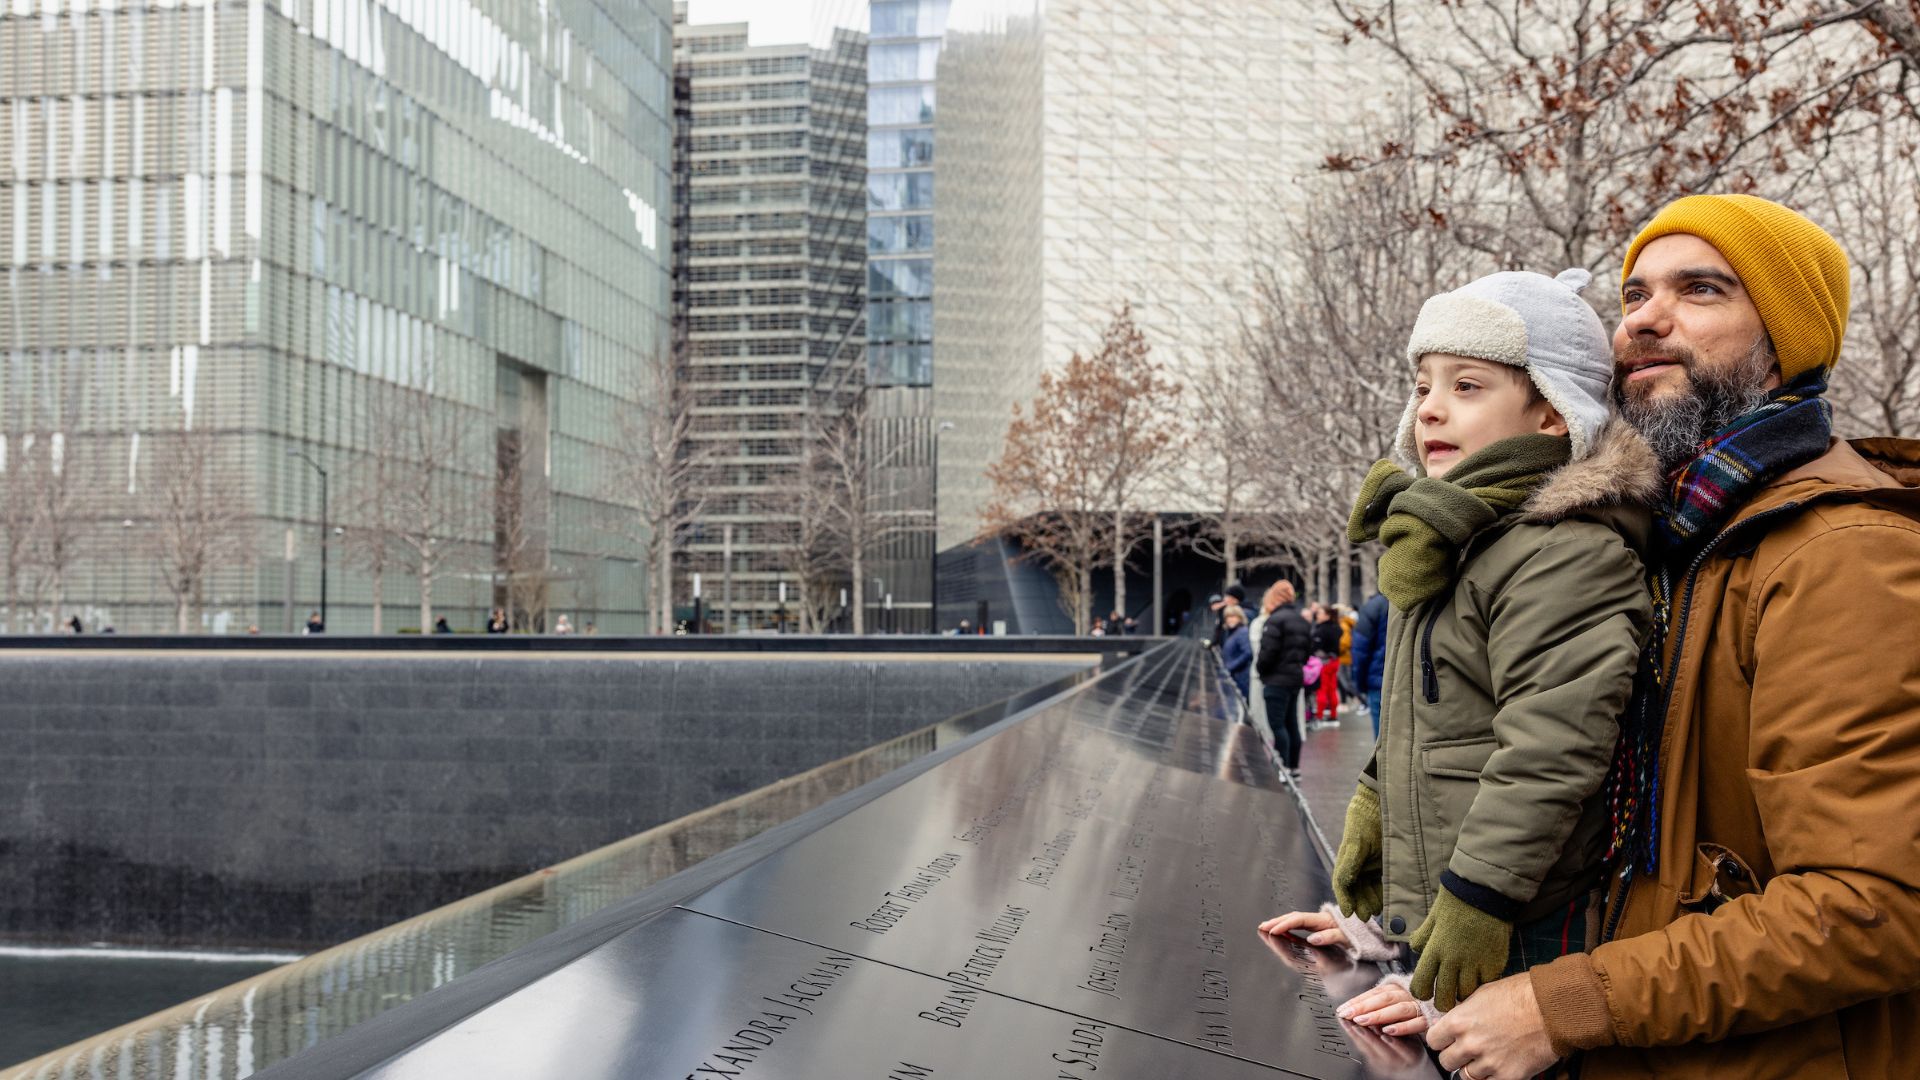 A young boy, propped up by his father, looks out over one of the pools on the 9/11 Memorial.